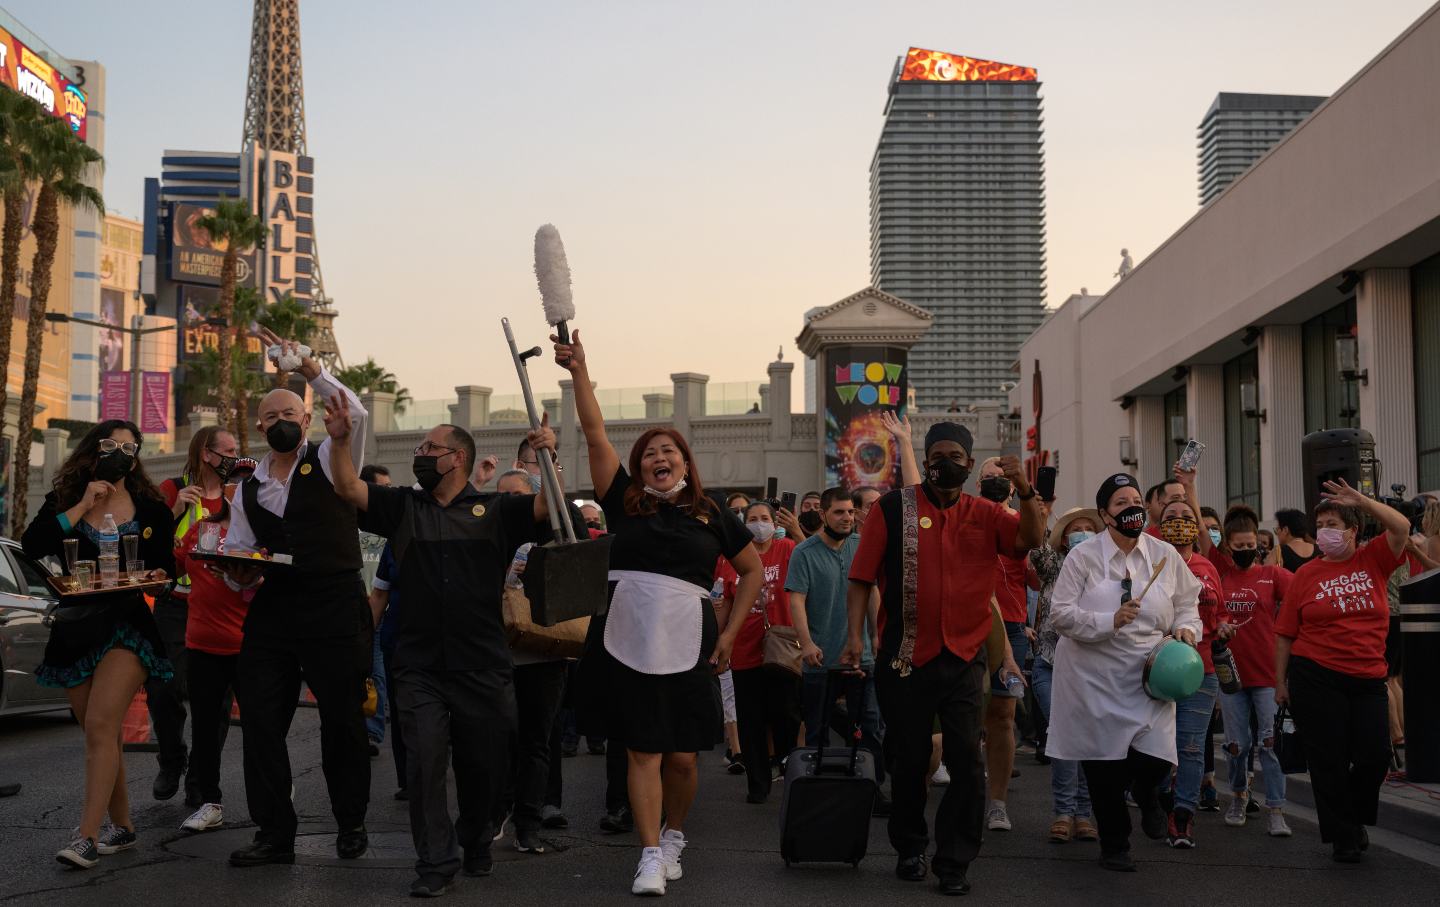 Union members and supporters march along the Strip during a Culinary Union “We Will Come Back Stronger!” rally in Las Vegas, Nev.